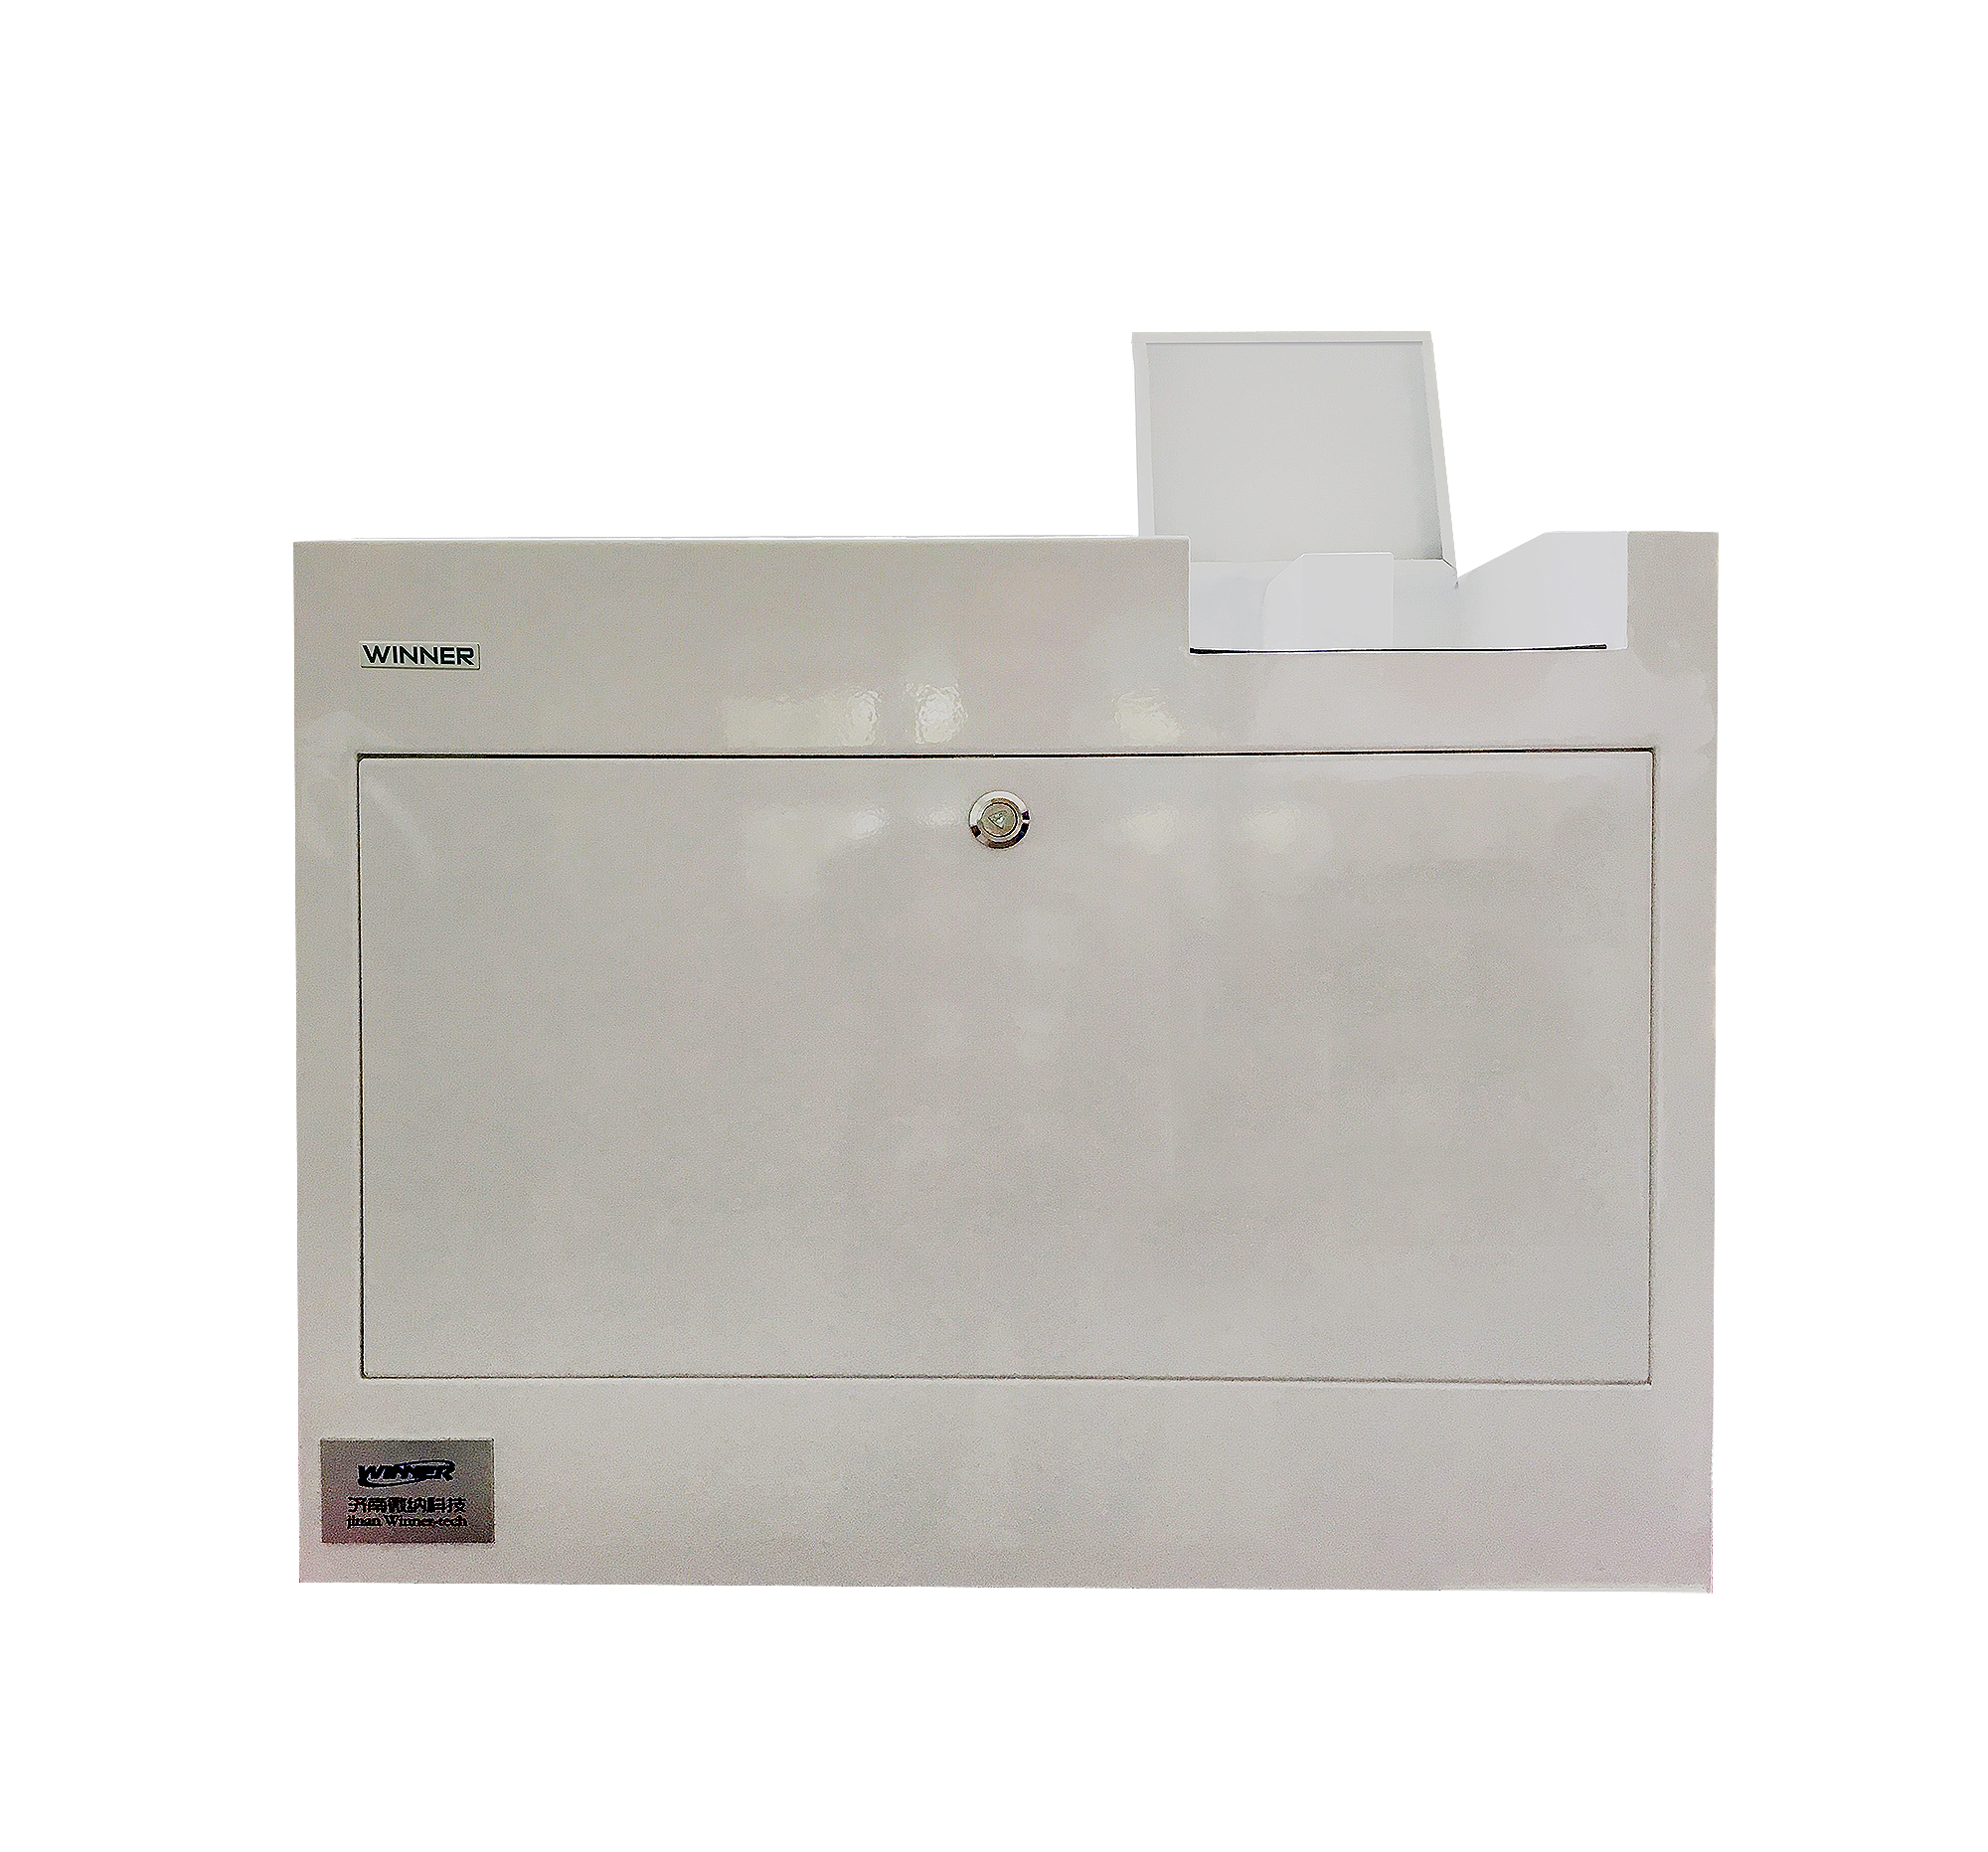 Winner100D Dynamic Image Particle Size Analyzer